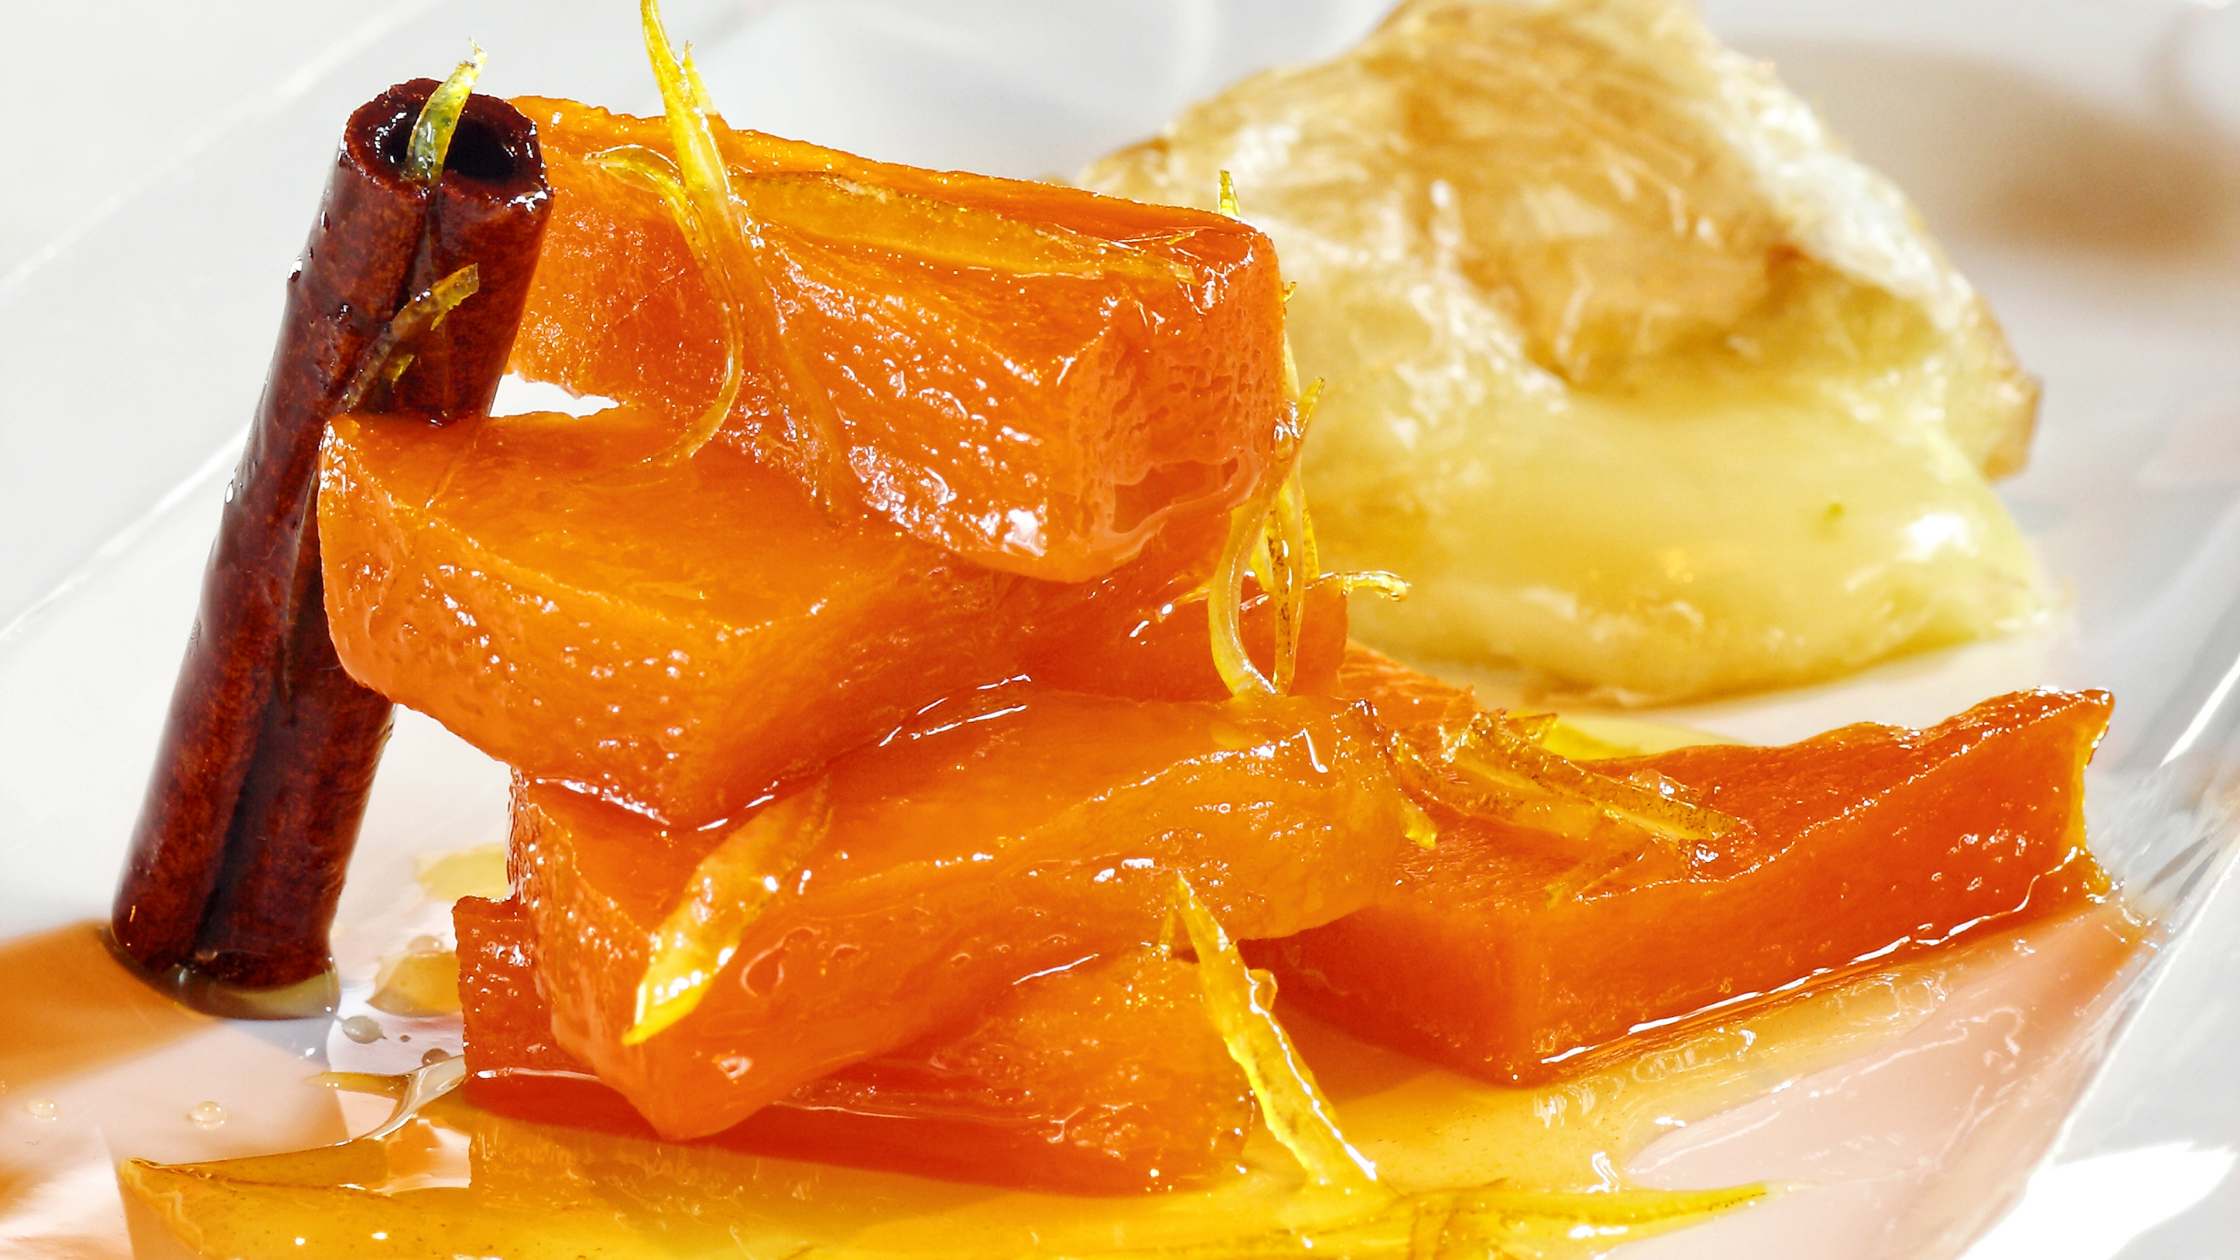 Dulce de zapallo or candied squash in spiced syrup